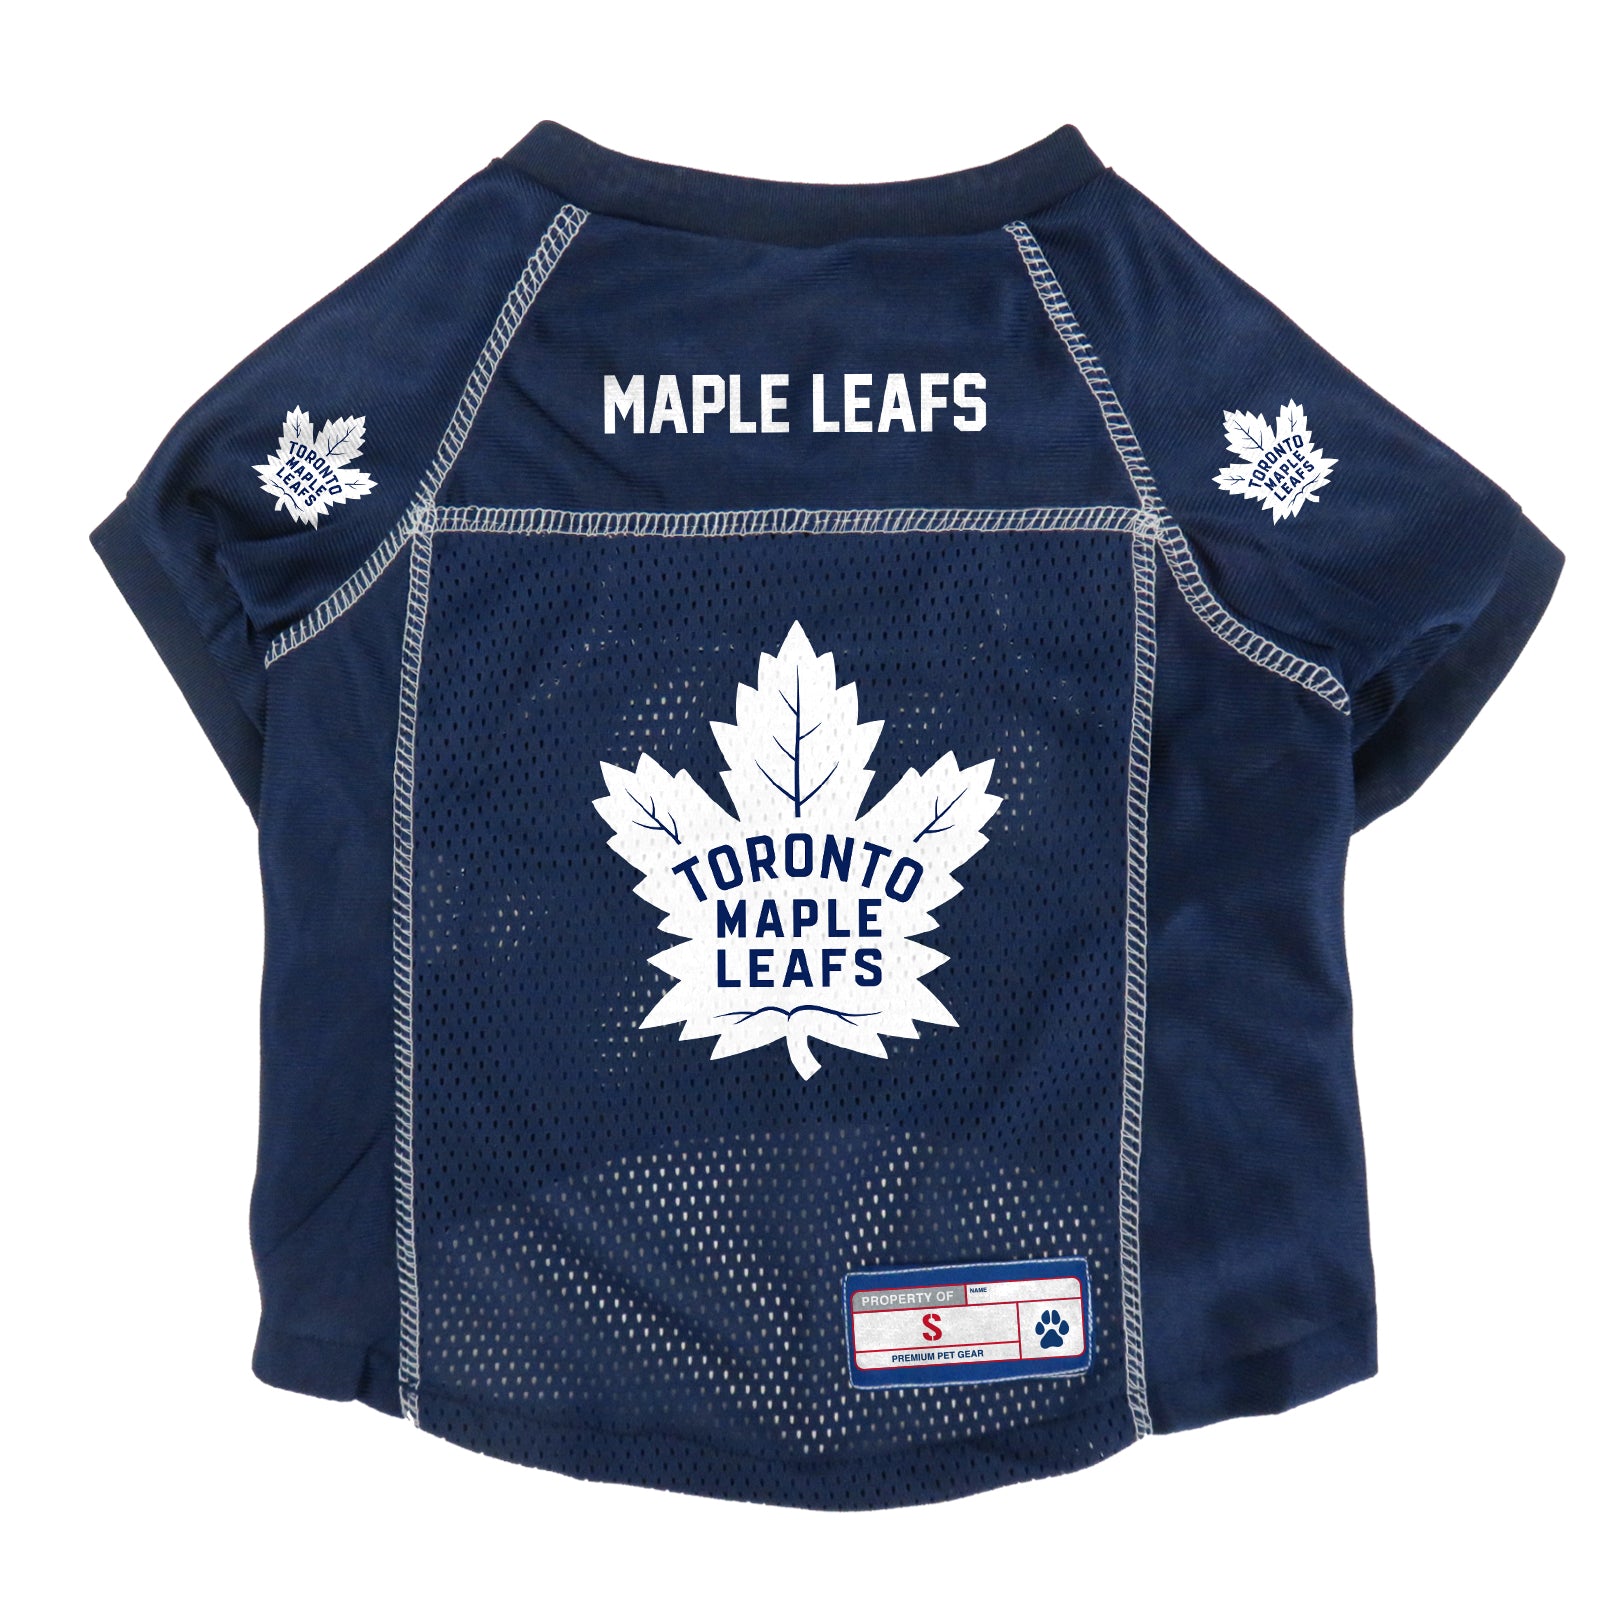 Pets First NHL Toronto Maple Leafs Tee Shirt for Dogs & Cats, Large. - are  You A Hockey Fan? Let Your Pet Be an NHL Fan Too!